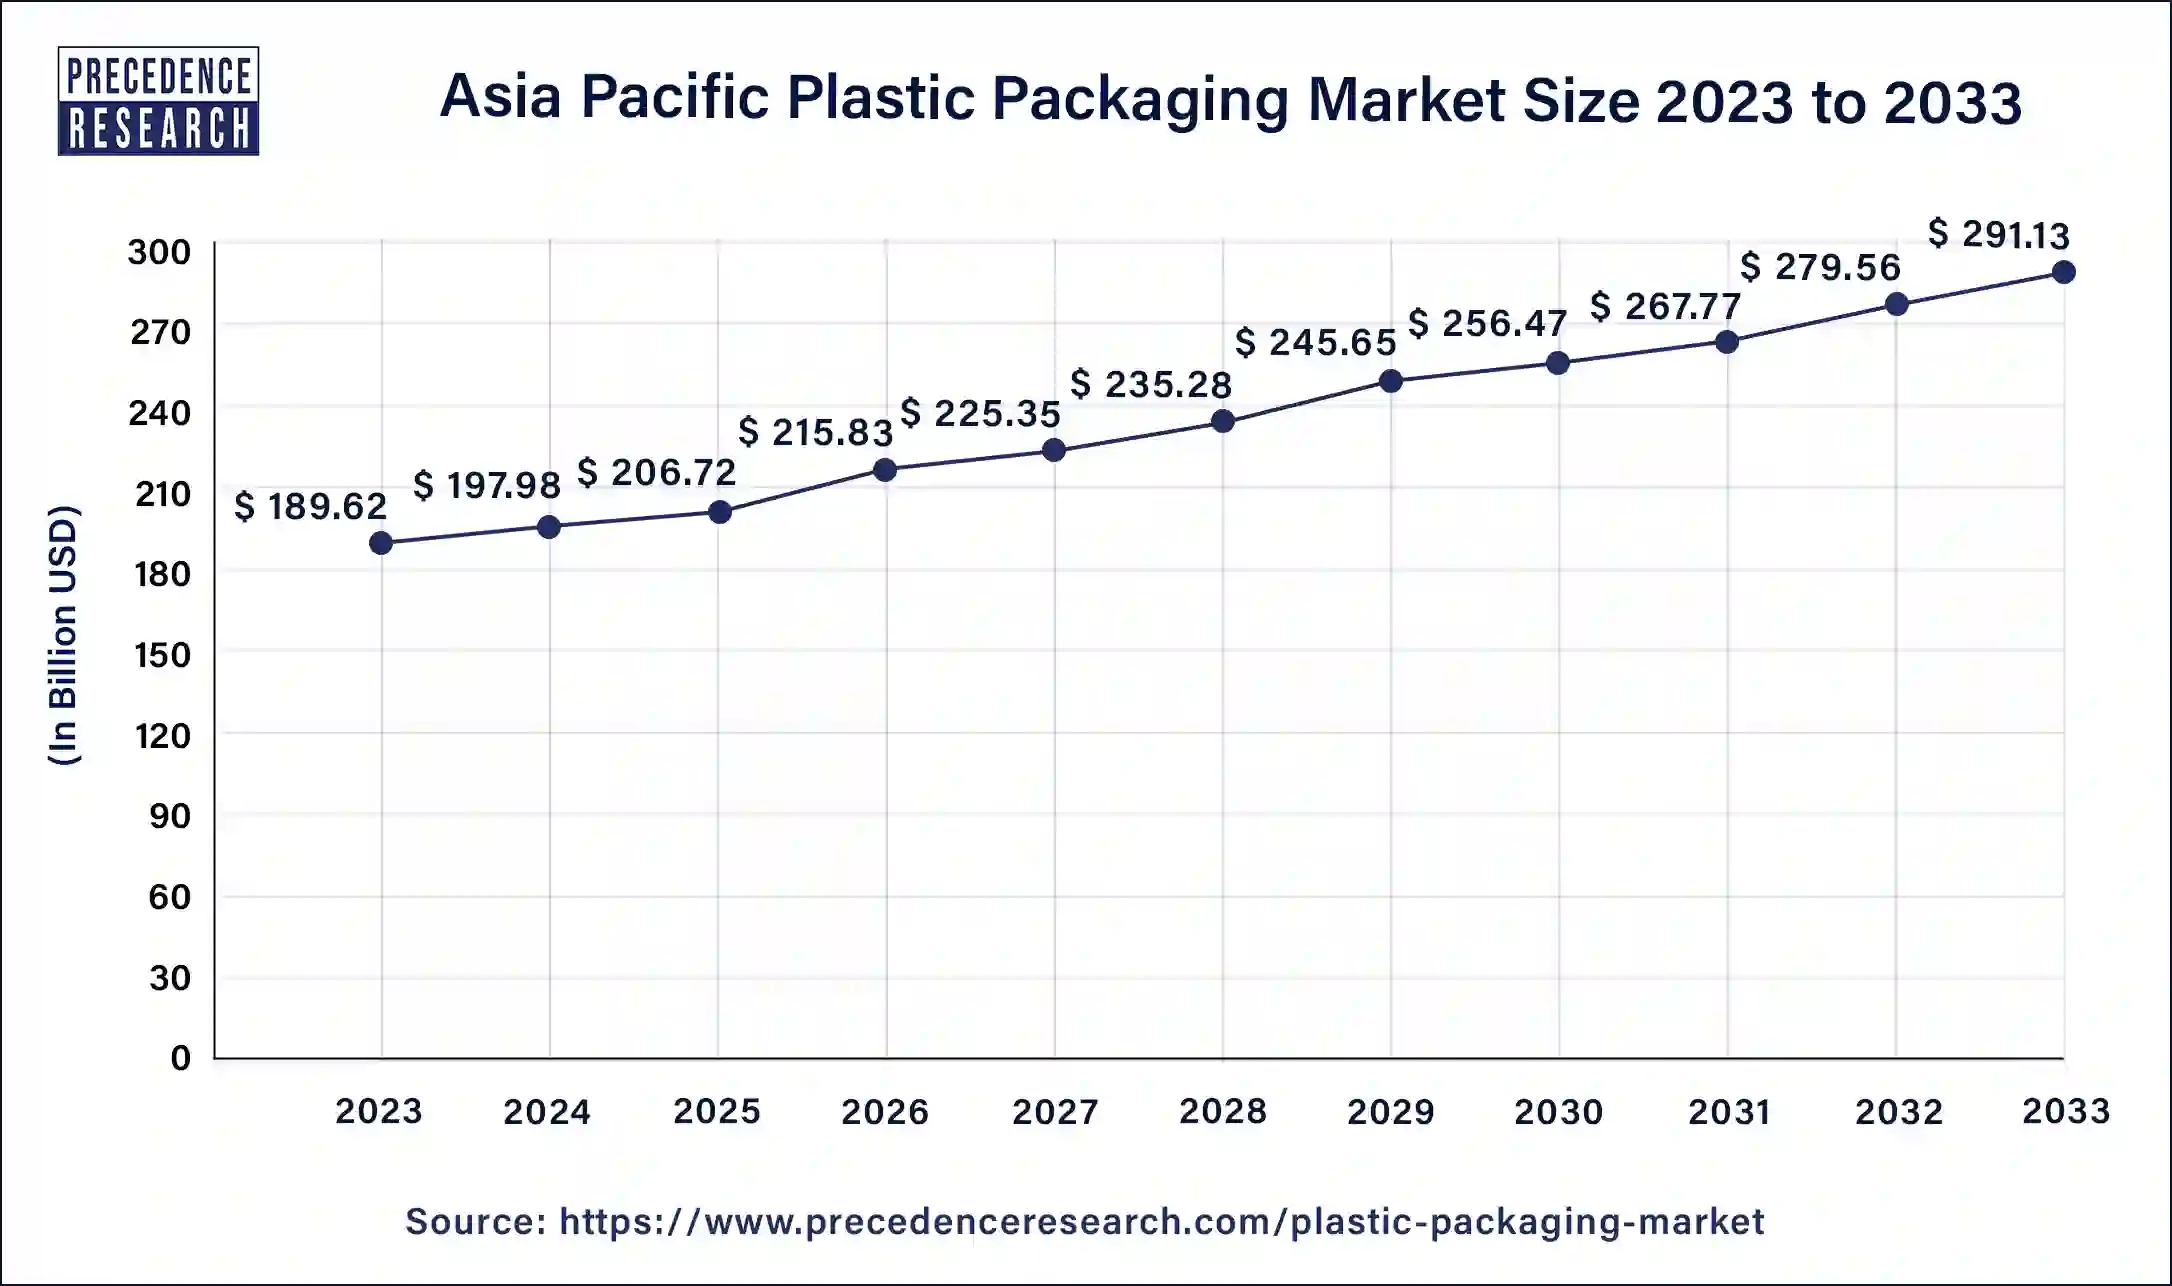 Asia Pacific Plastic Packaging Market Size 2024 to 2033